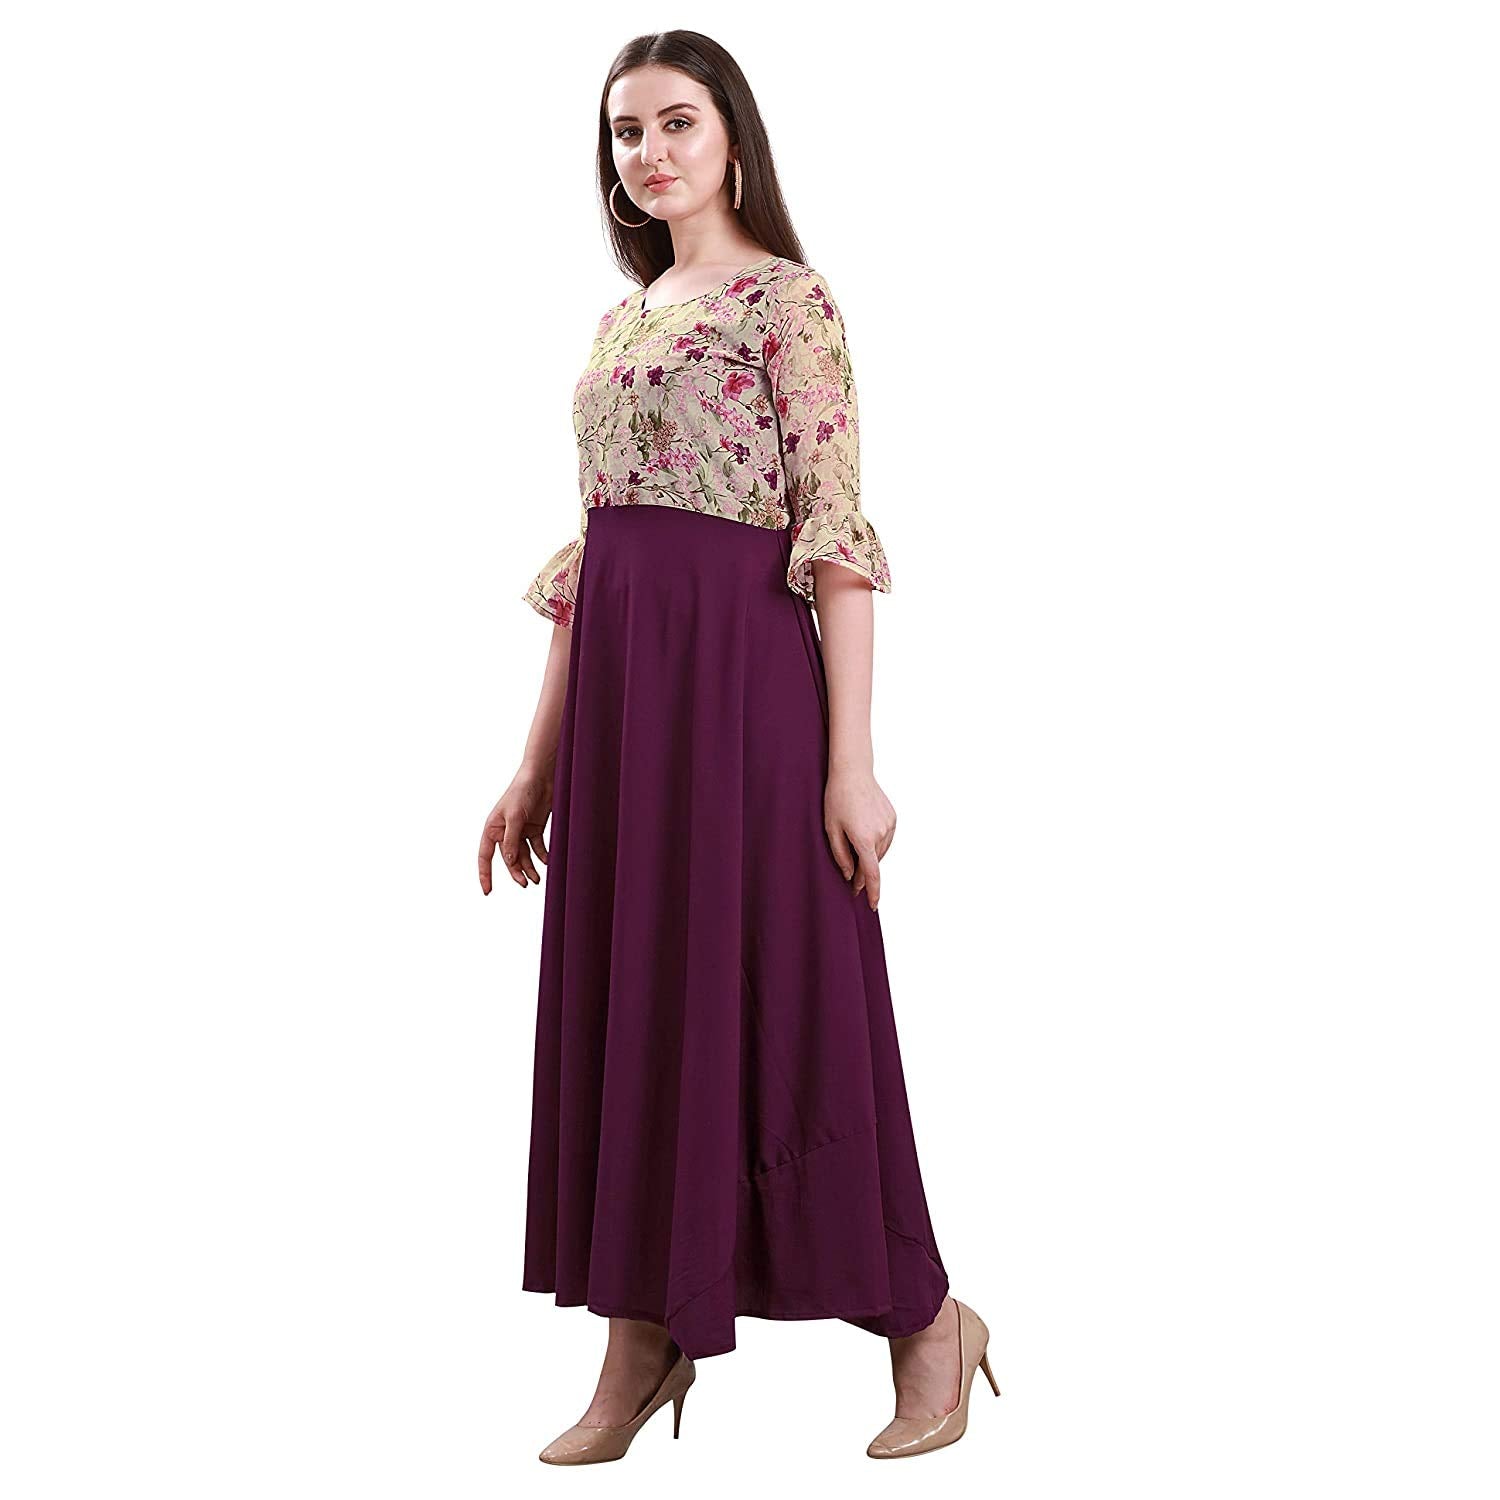 Fashion2wear Women's A-Line Maxi Dress -  Dresses in Sri Lanka from Arcade Online Shopping - Just Rs. 4699!